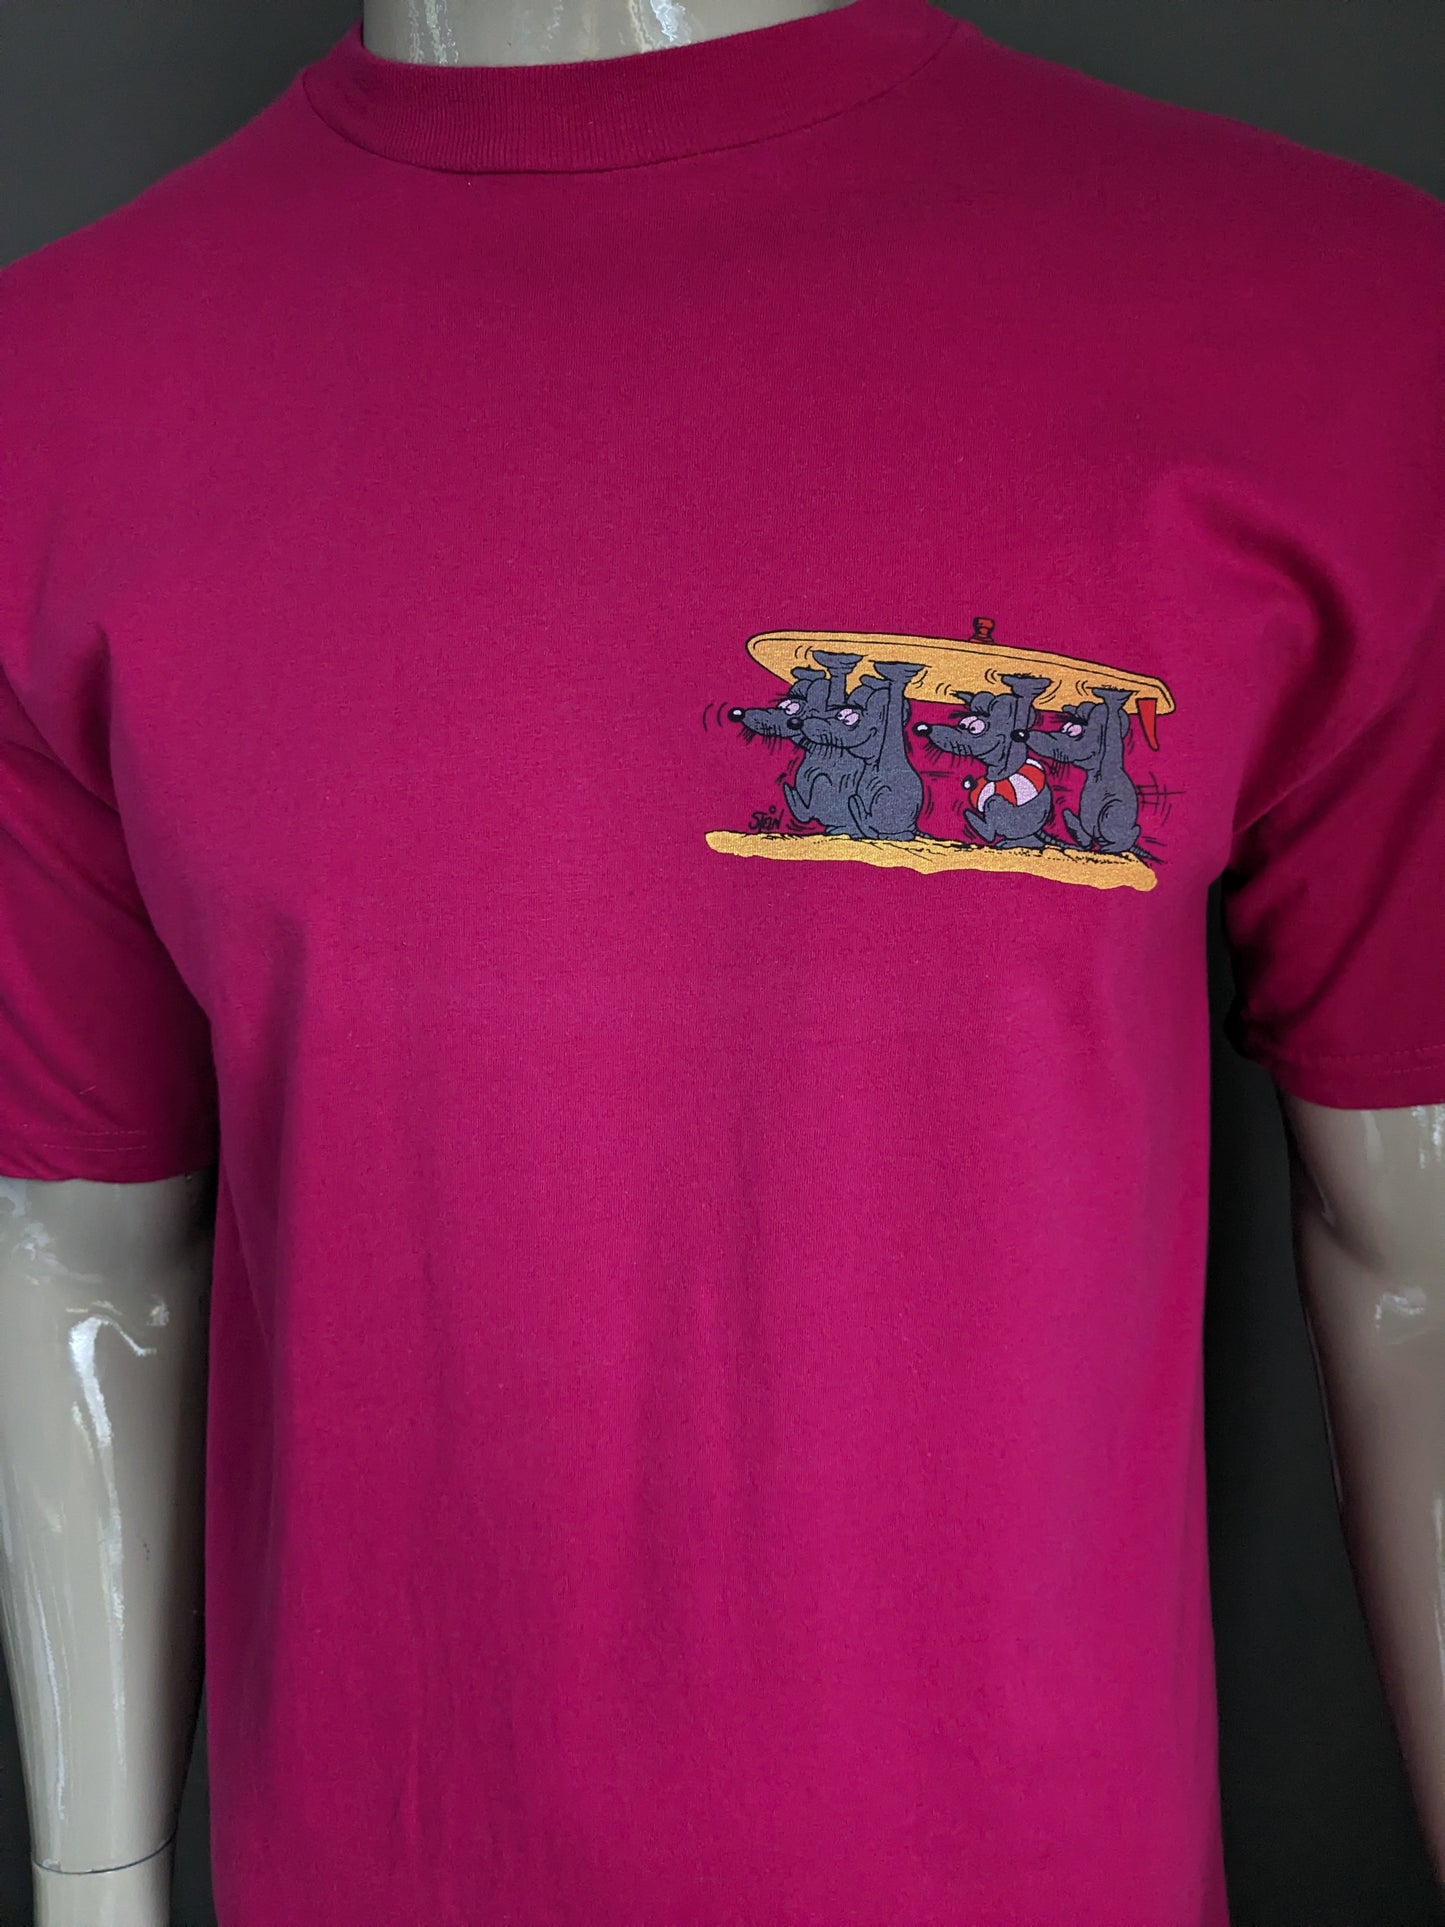 Vintage Mil Uno Shirt "Mouse". Pink with print. Size M.